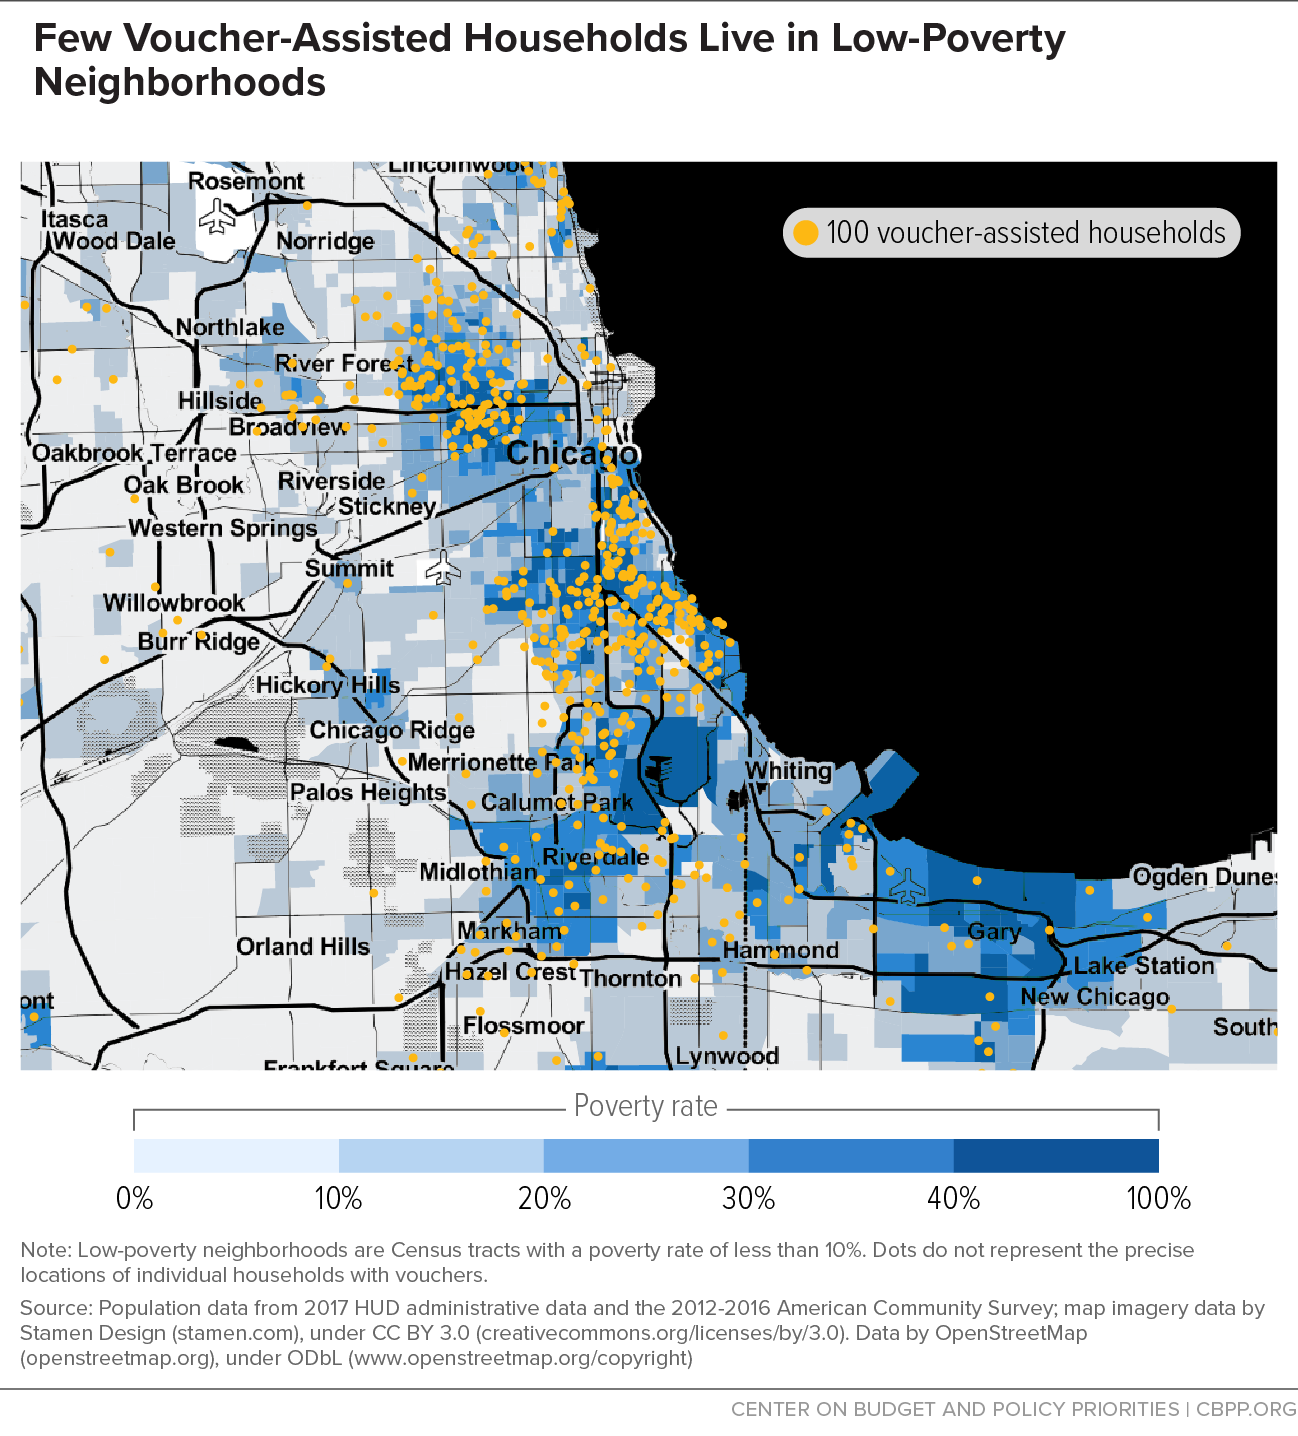 Few Vouchers-Assisted Households Live in Low-Poverty Neighborhoods